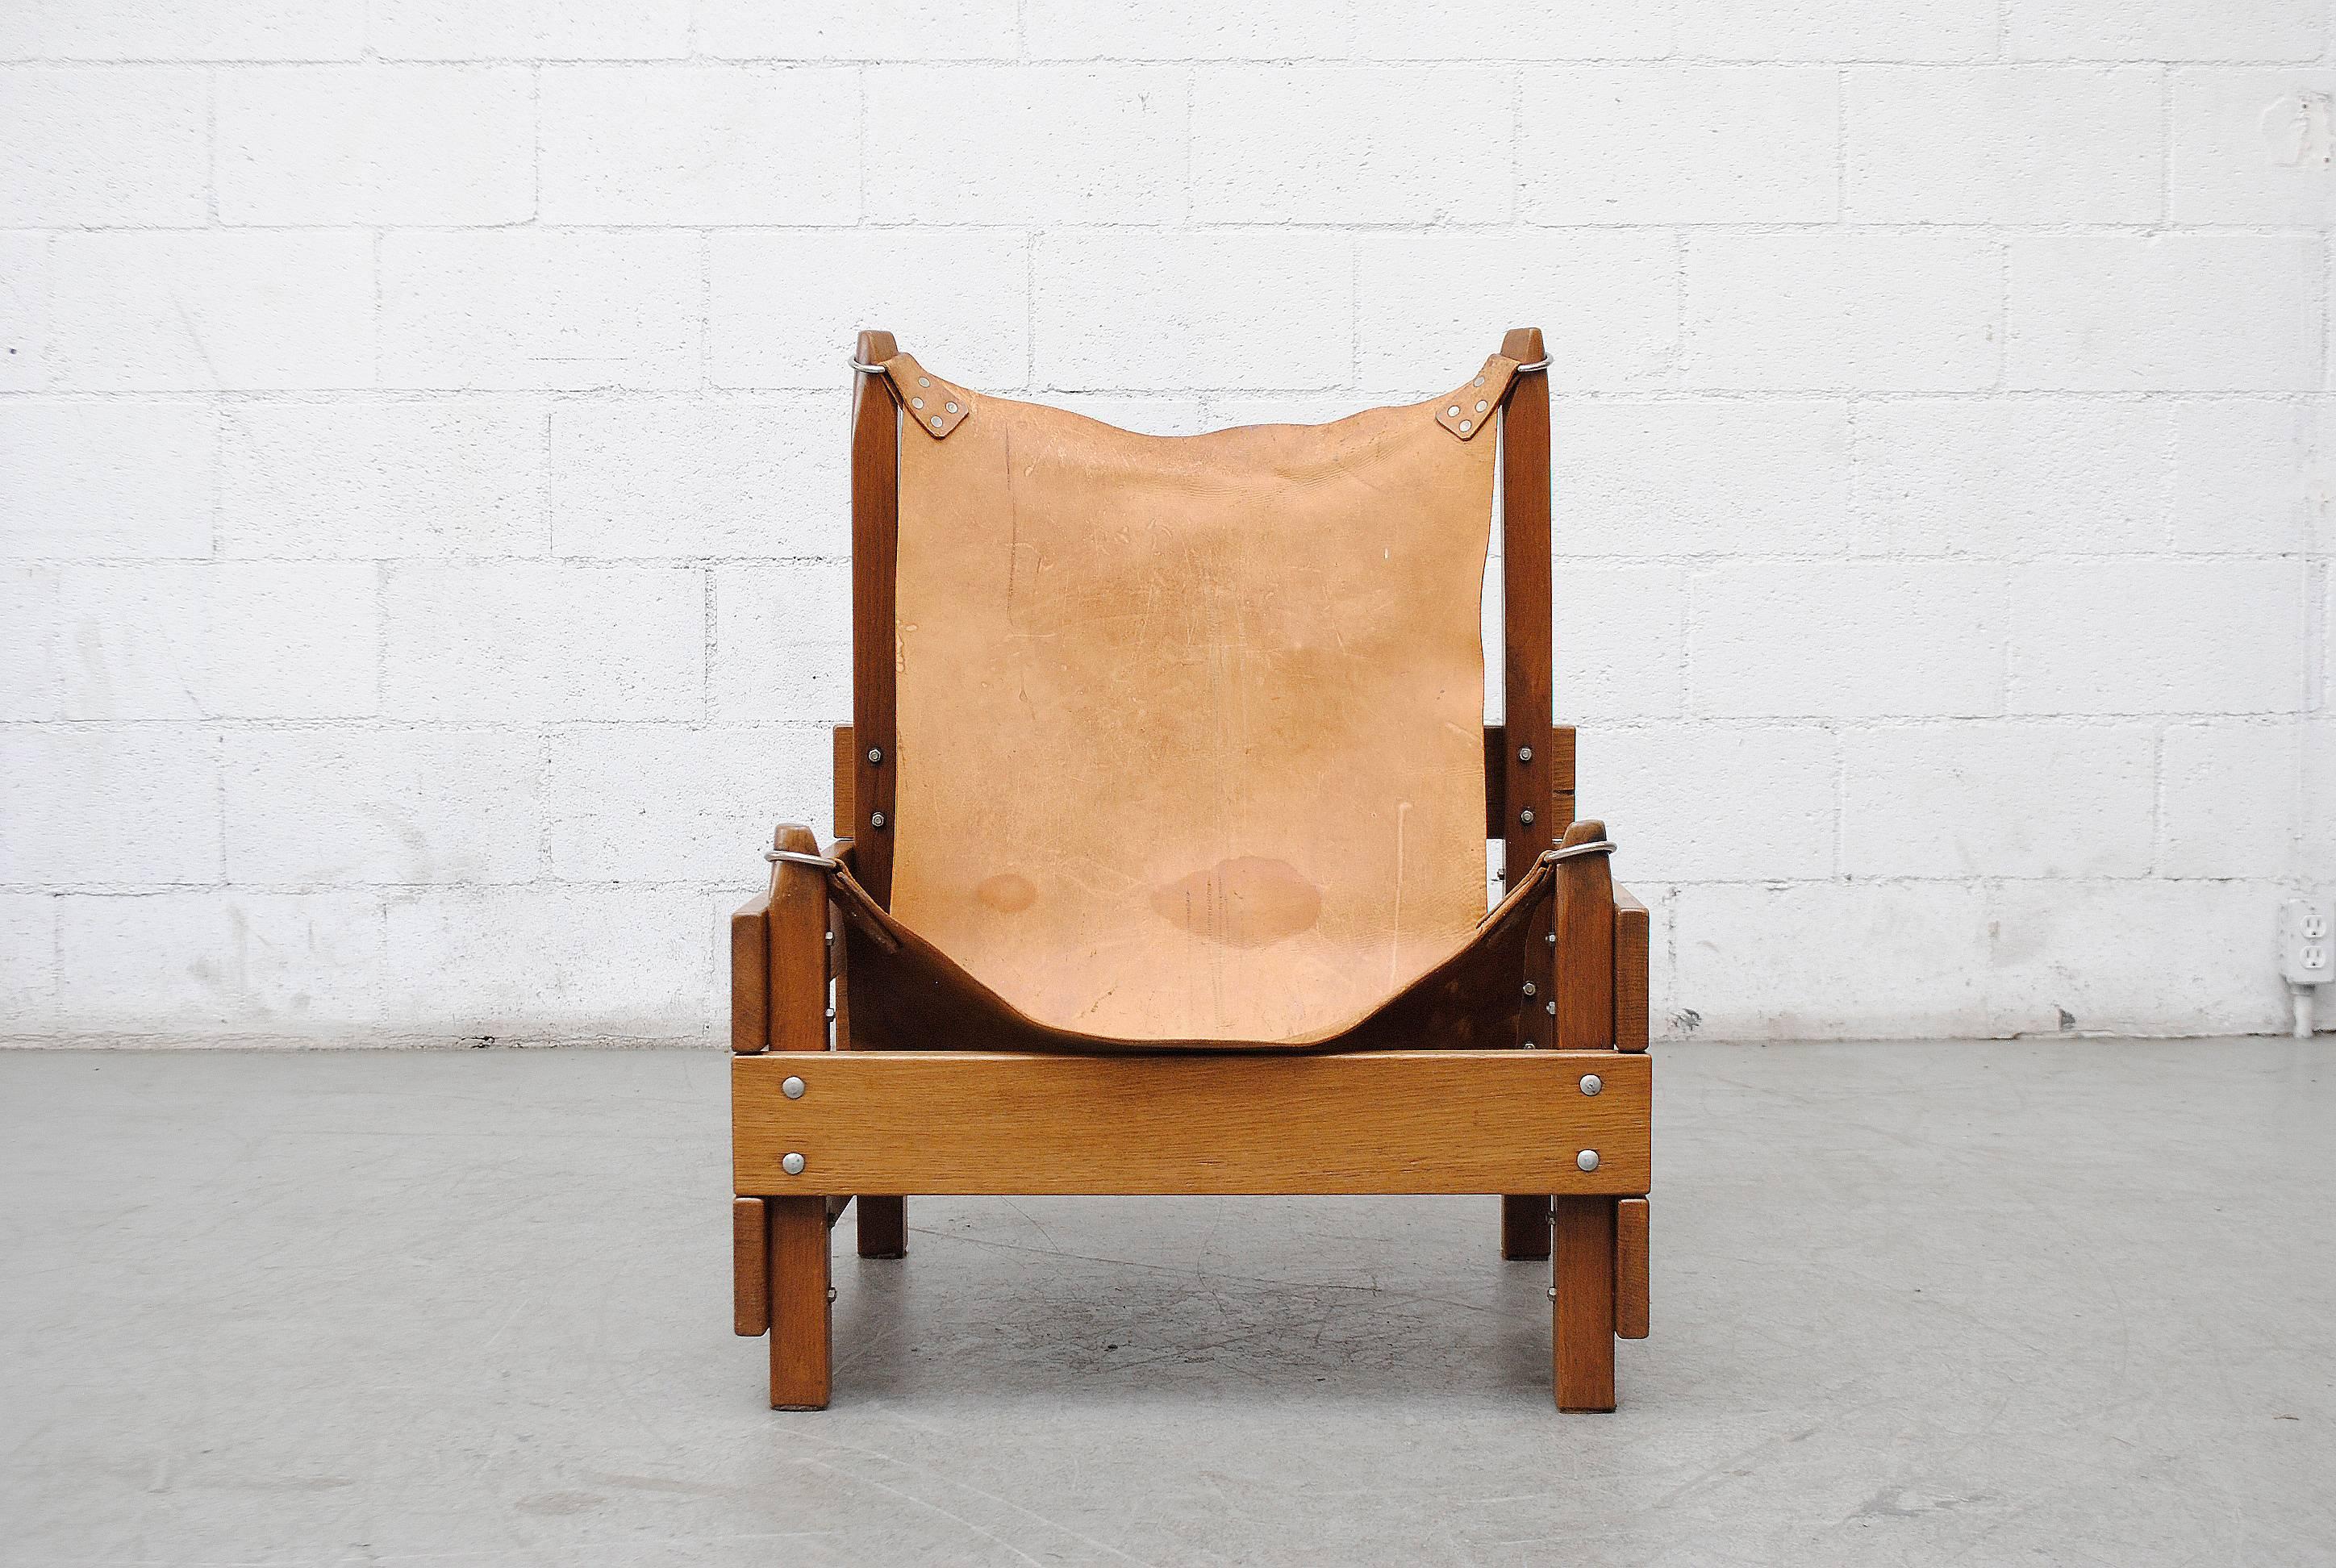 Super cool midcentury Brutalist, Safari inspired lounge chair. Natural leather sling seat with metal loops. Lightly refinished wood frame. Wear consistent with age and use.